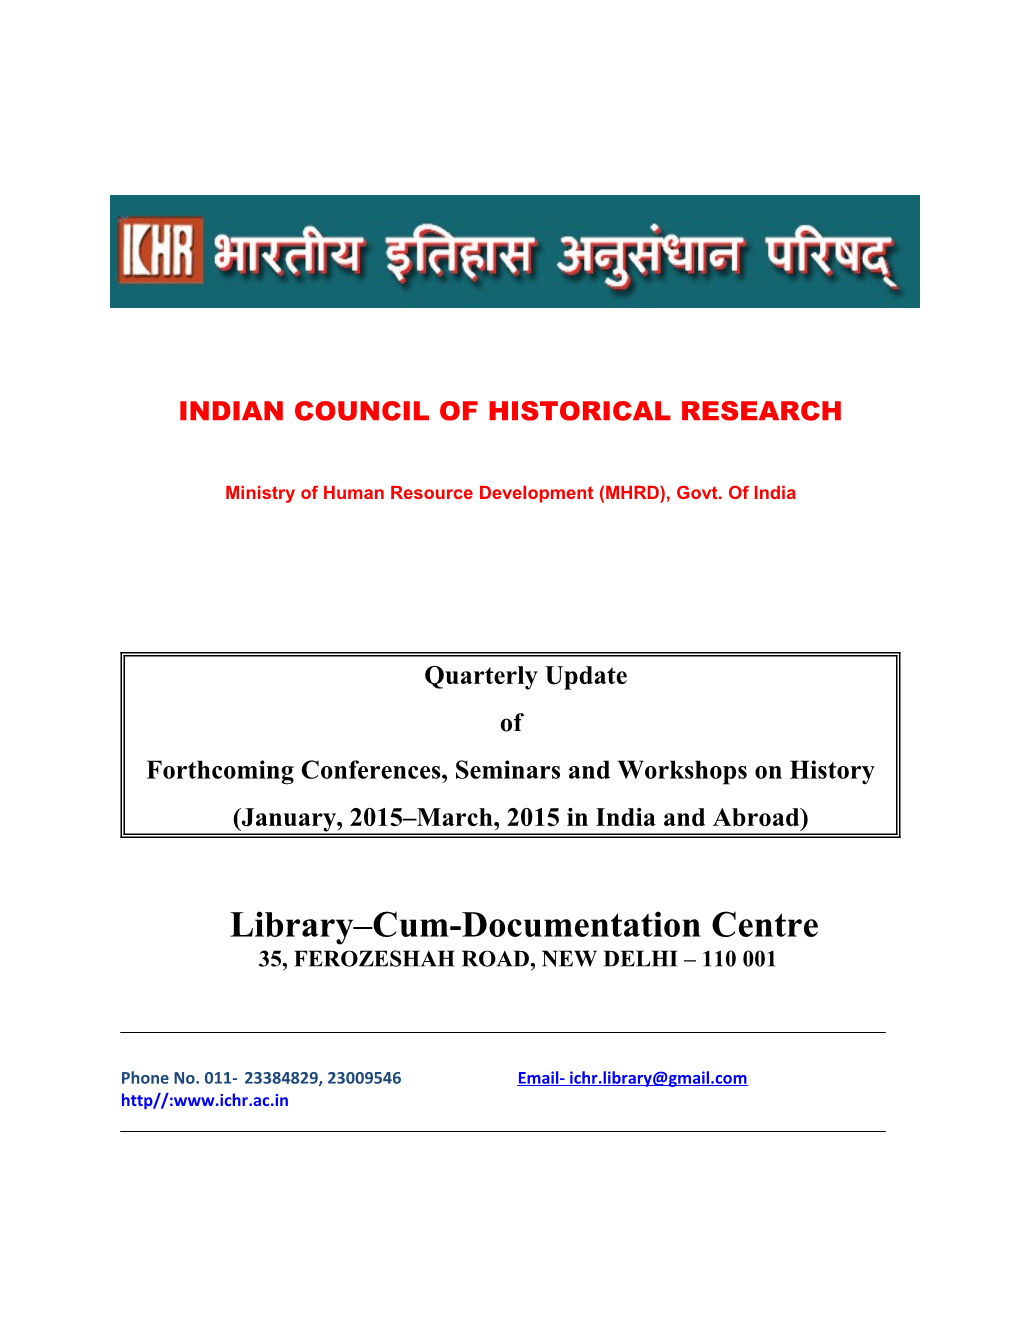 Indian Council of Historical Research